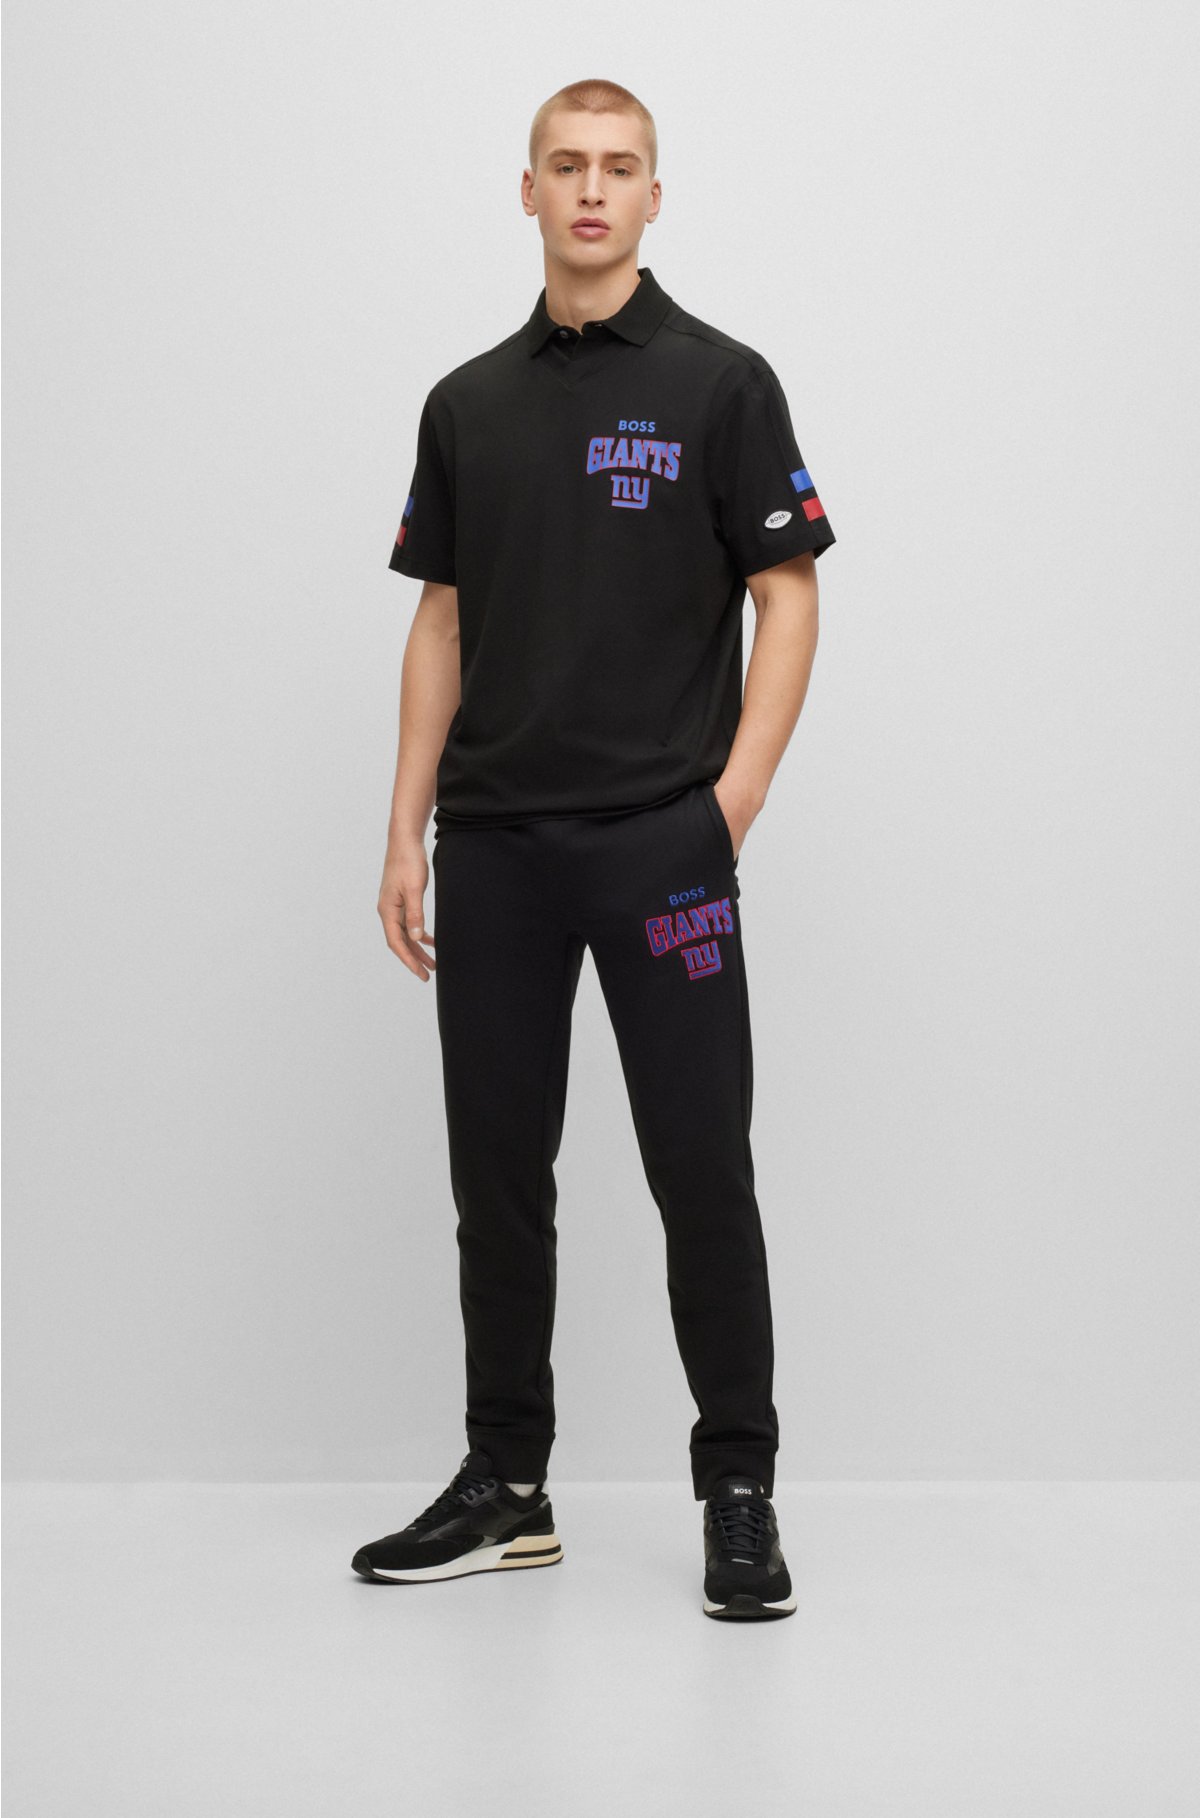 BOSS x NFL cotton-terry tracksuit bottoms with collaborative branding, Giants